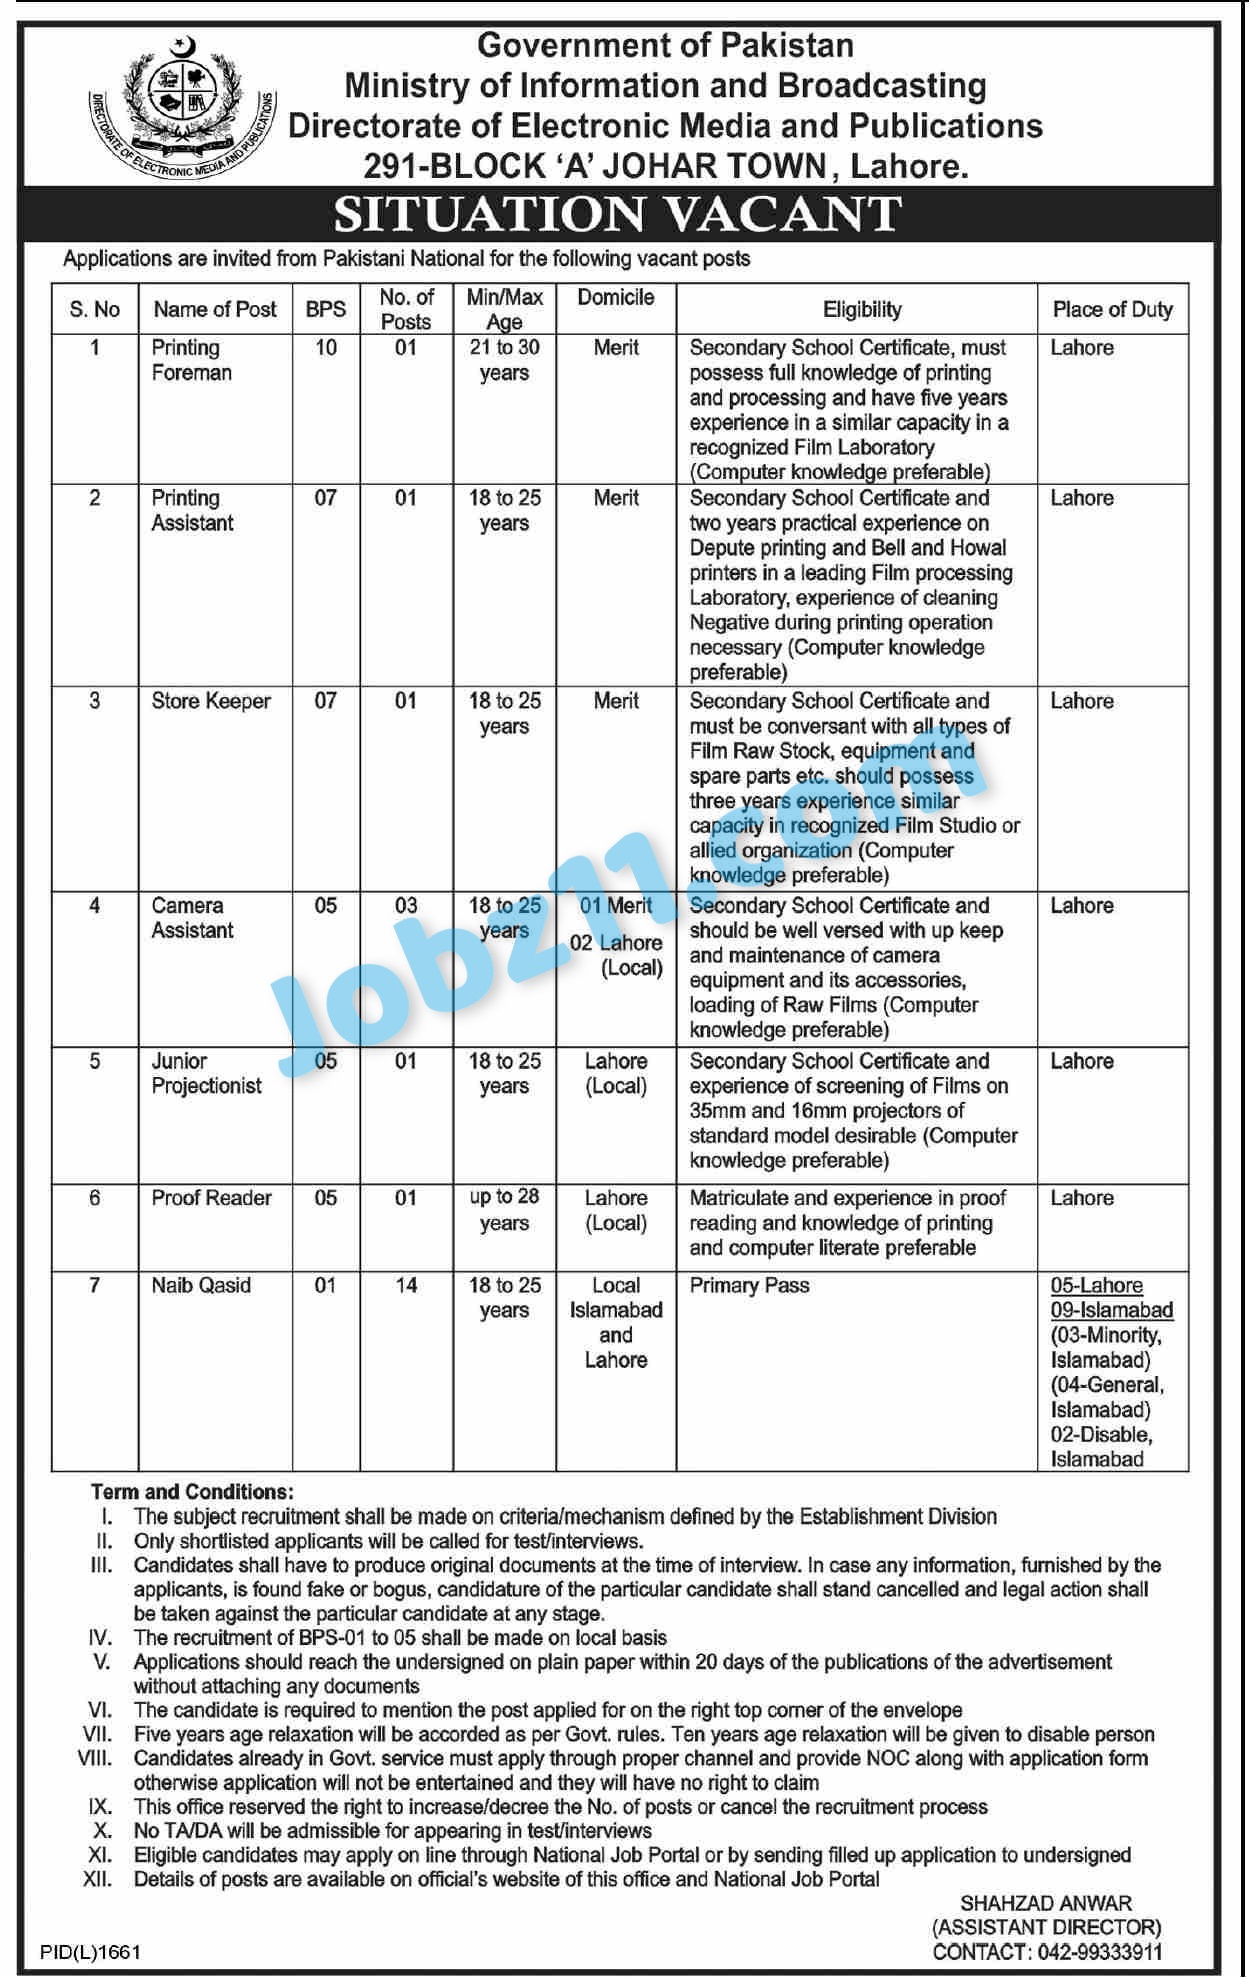 Ministry of Information and Broadcasting Jobs 2022 Online Application